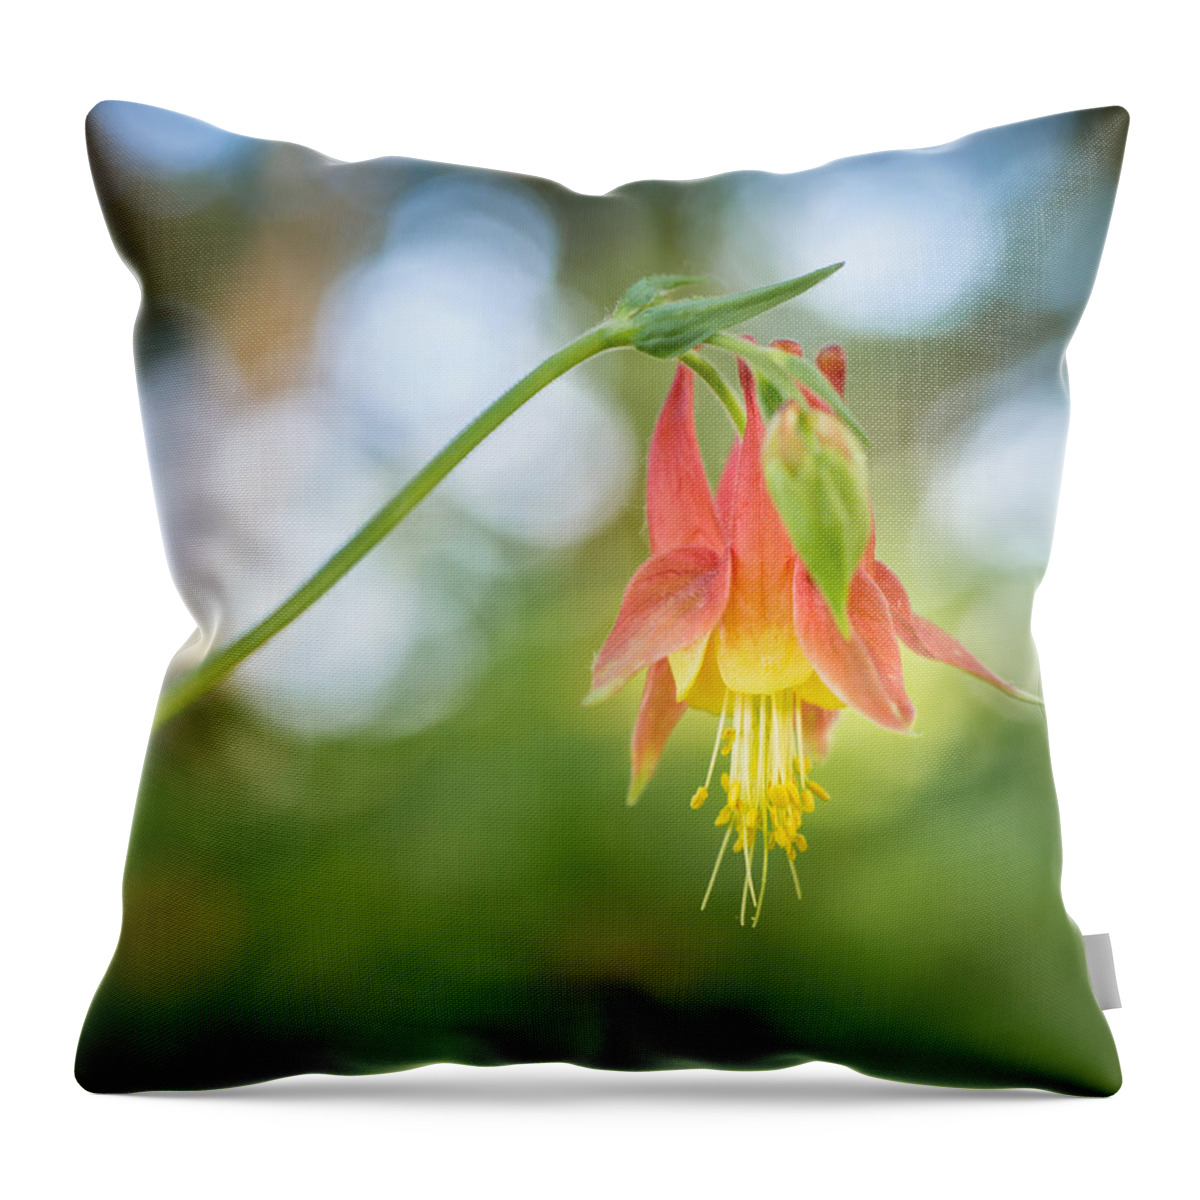 Wildflower Throw Pillow featuring the photograph Japanese Lantern by Bill Pevlor